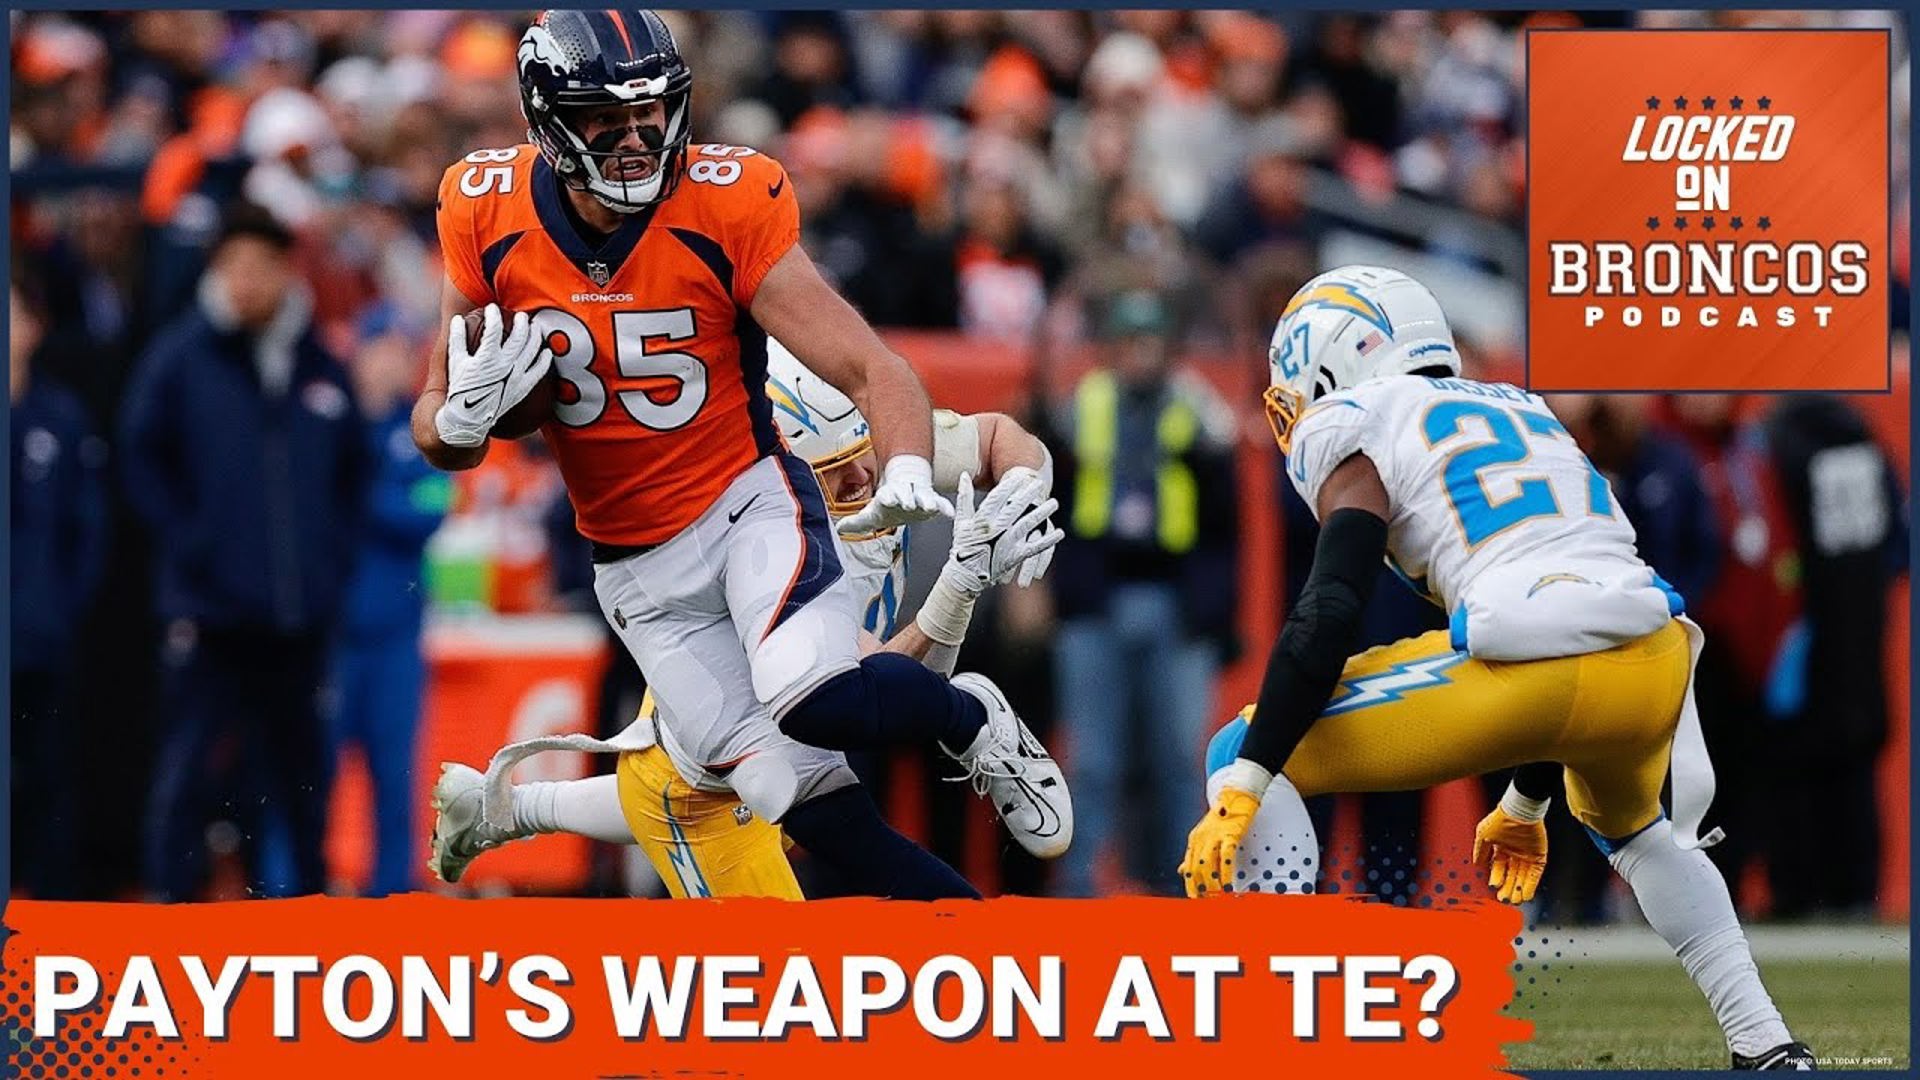 Lucas Krull could become the Denver Broncos best tight end this upcoming season under Sean Payton. How can Krull help the Broncos offense be less one-dimensional.